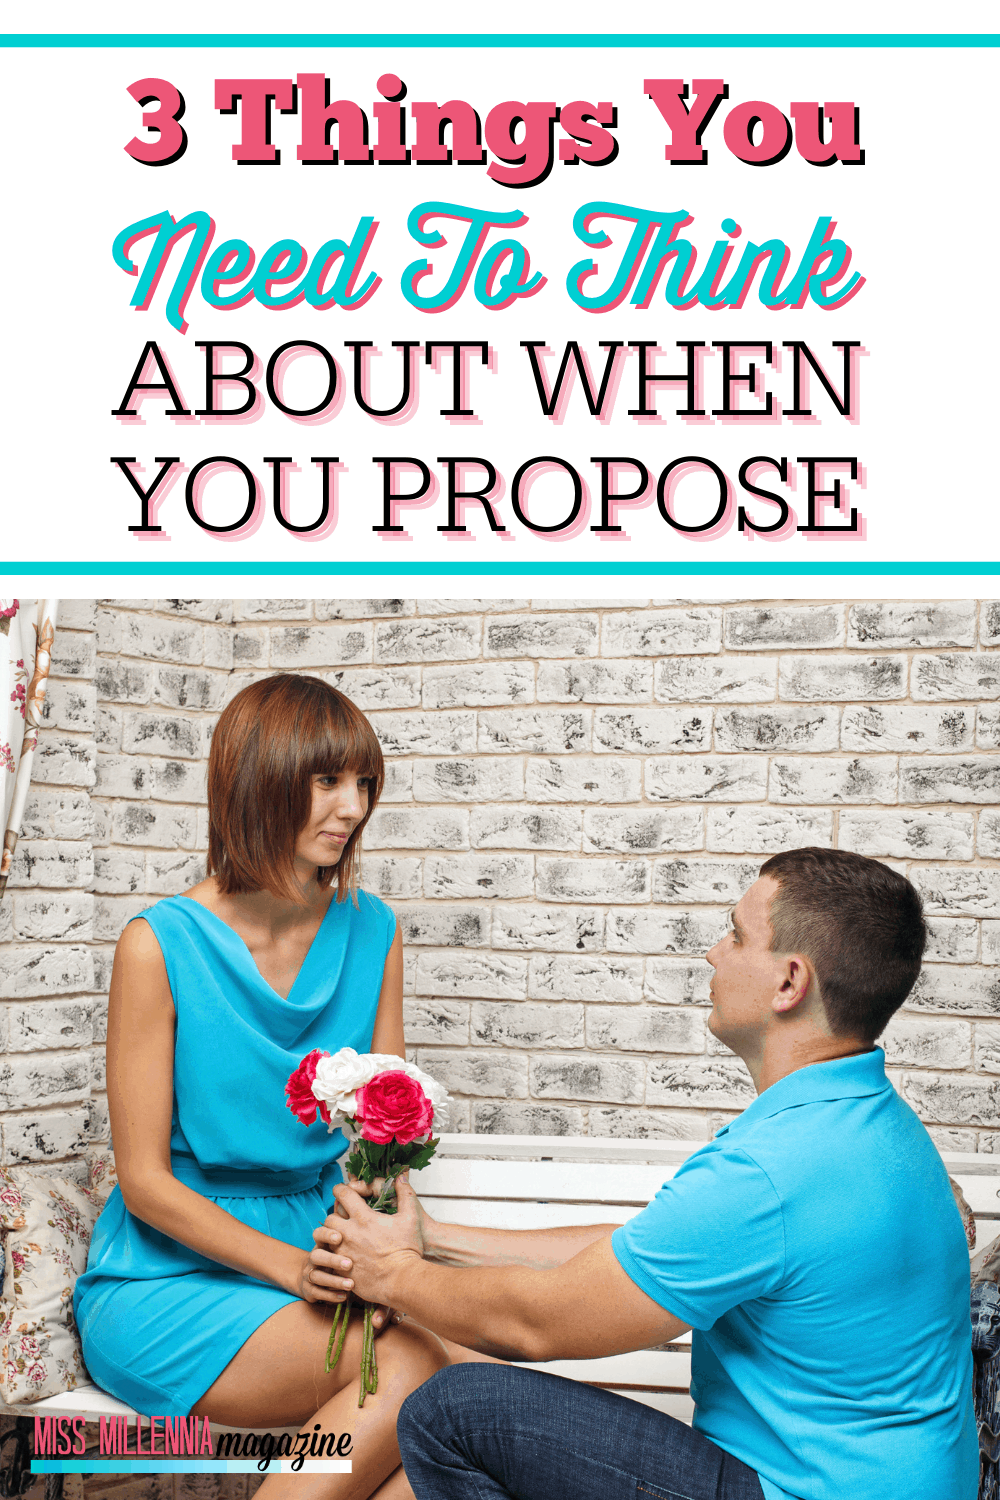 3 Things You Need To Think About When You Propose